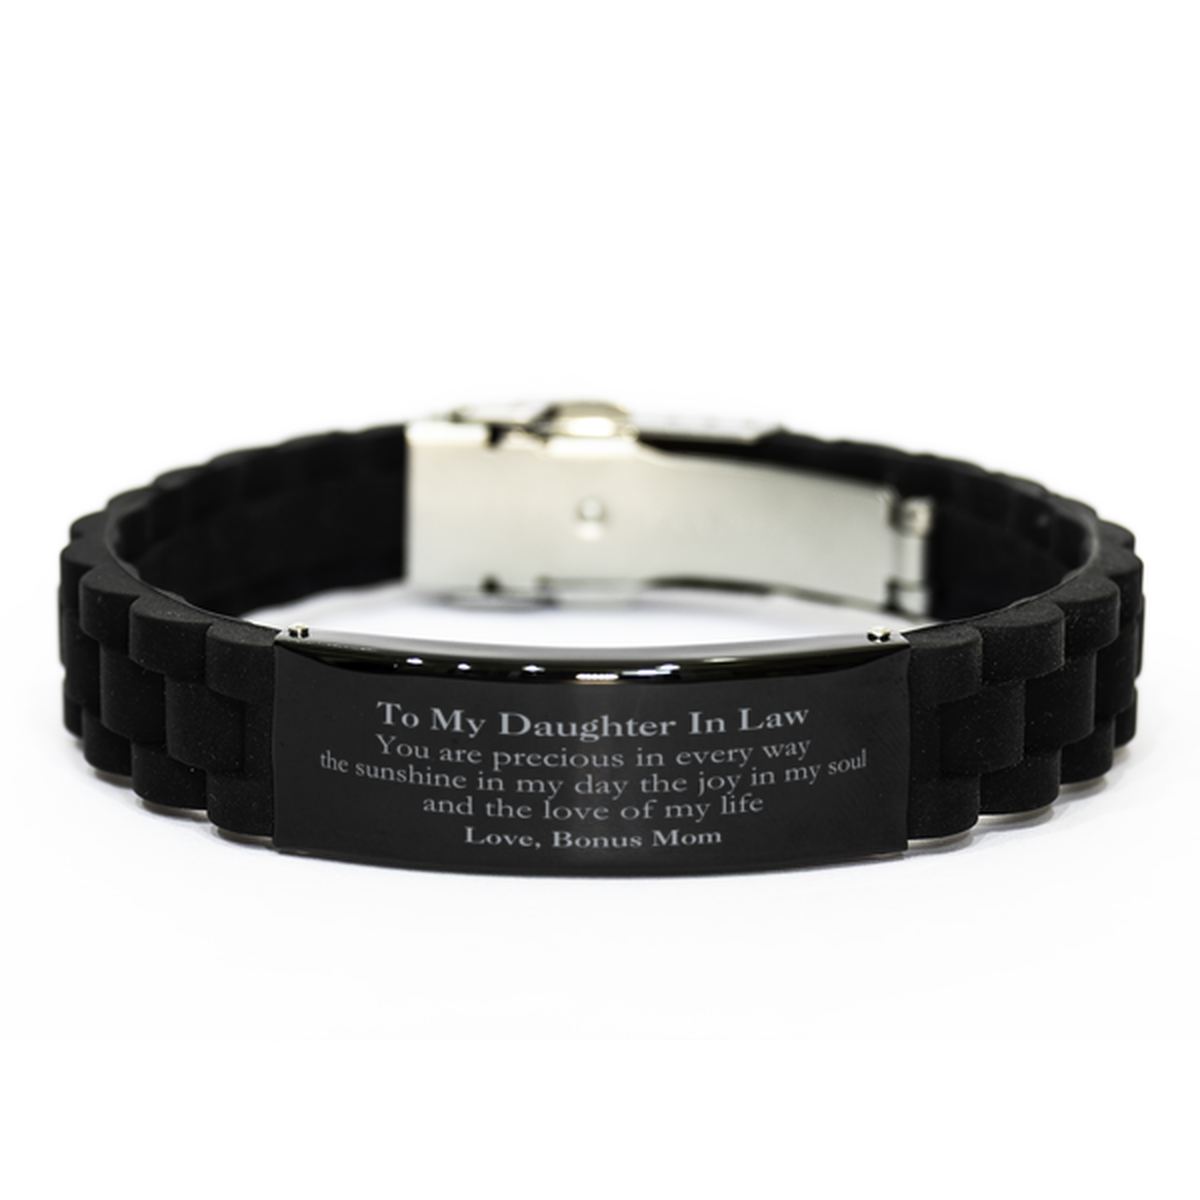 Graduation Gifts for Daughter In Law Black Glidelock Clasp Bracelet Present from Bonus Mom, Christmas Daughter In Law Birthday Gifts Daughter In Law You are precious in every way the sunshine in my day. Love, Bonus Mom